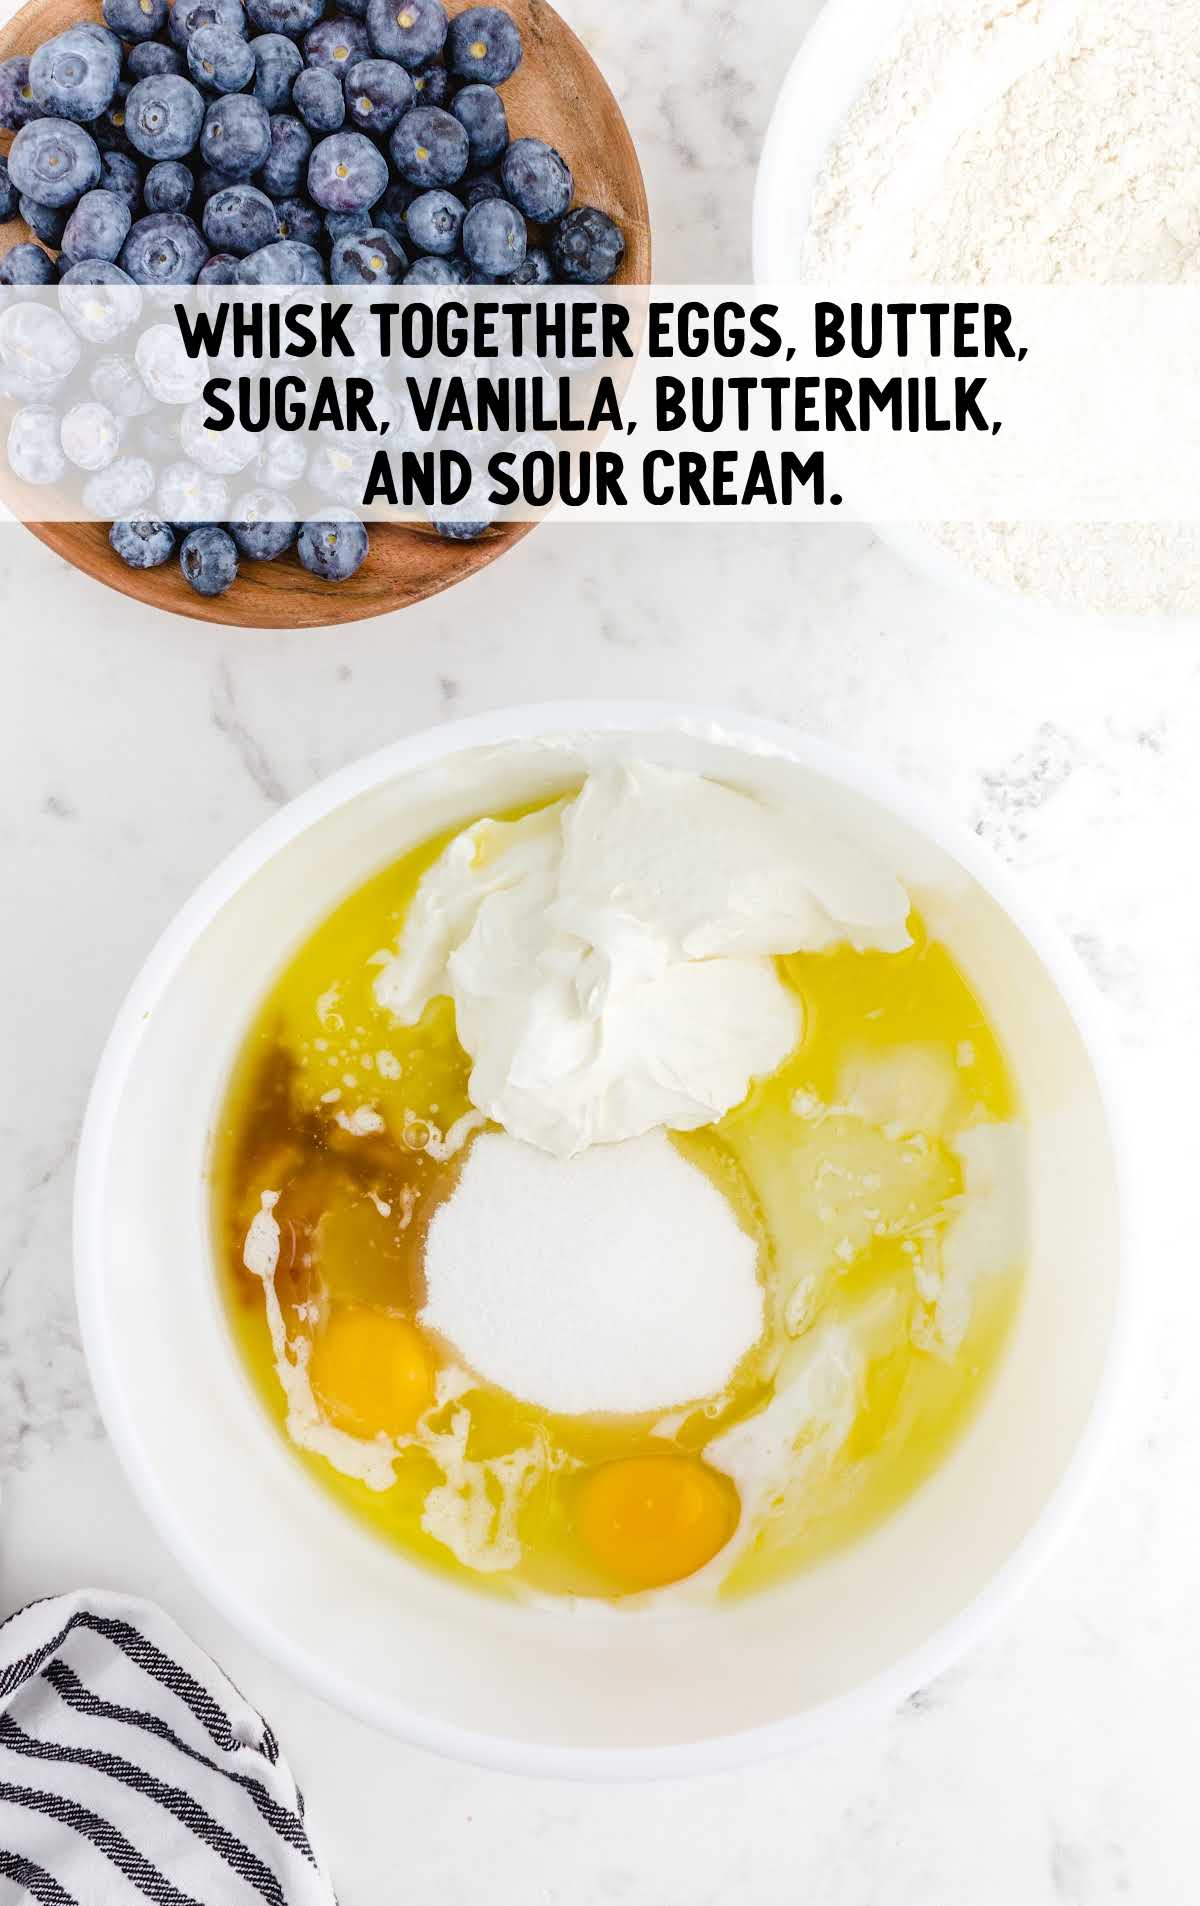 eggs, butter, sugar, vanilla, buttermilk, and sour cream whisked together